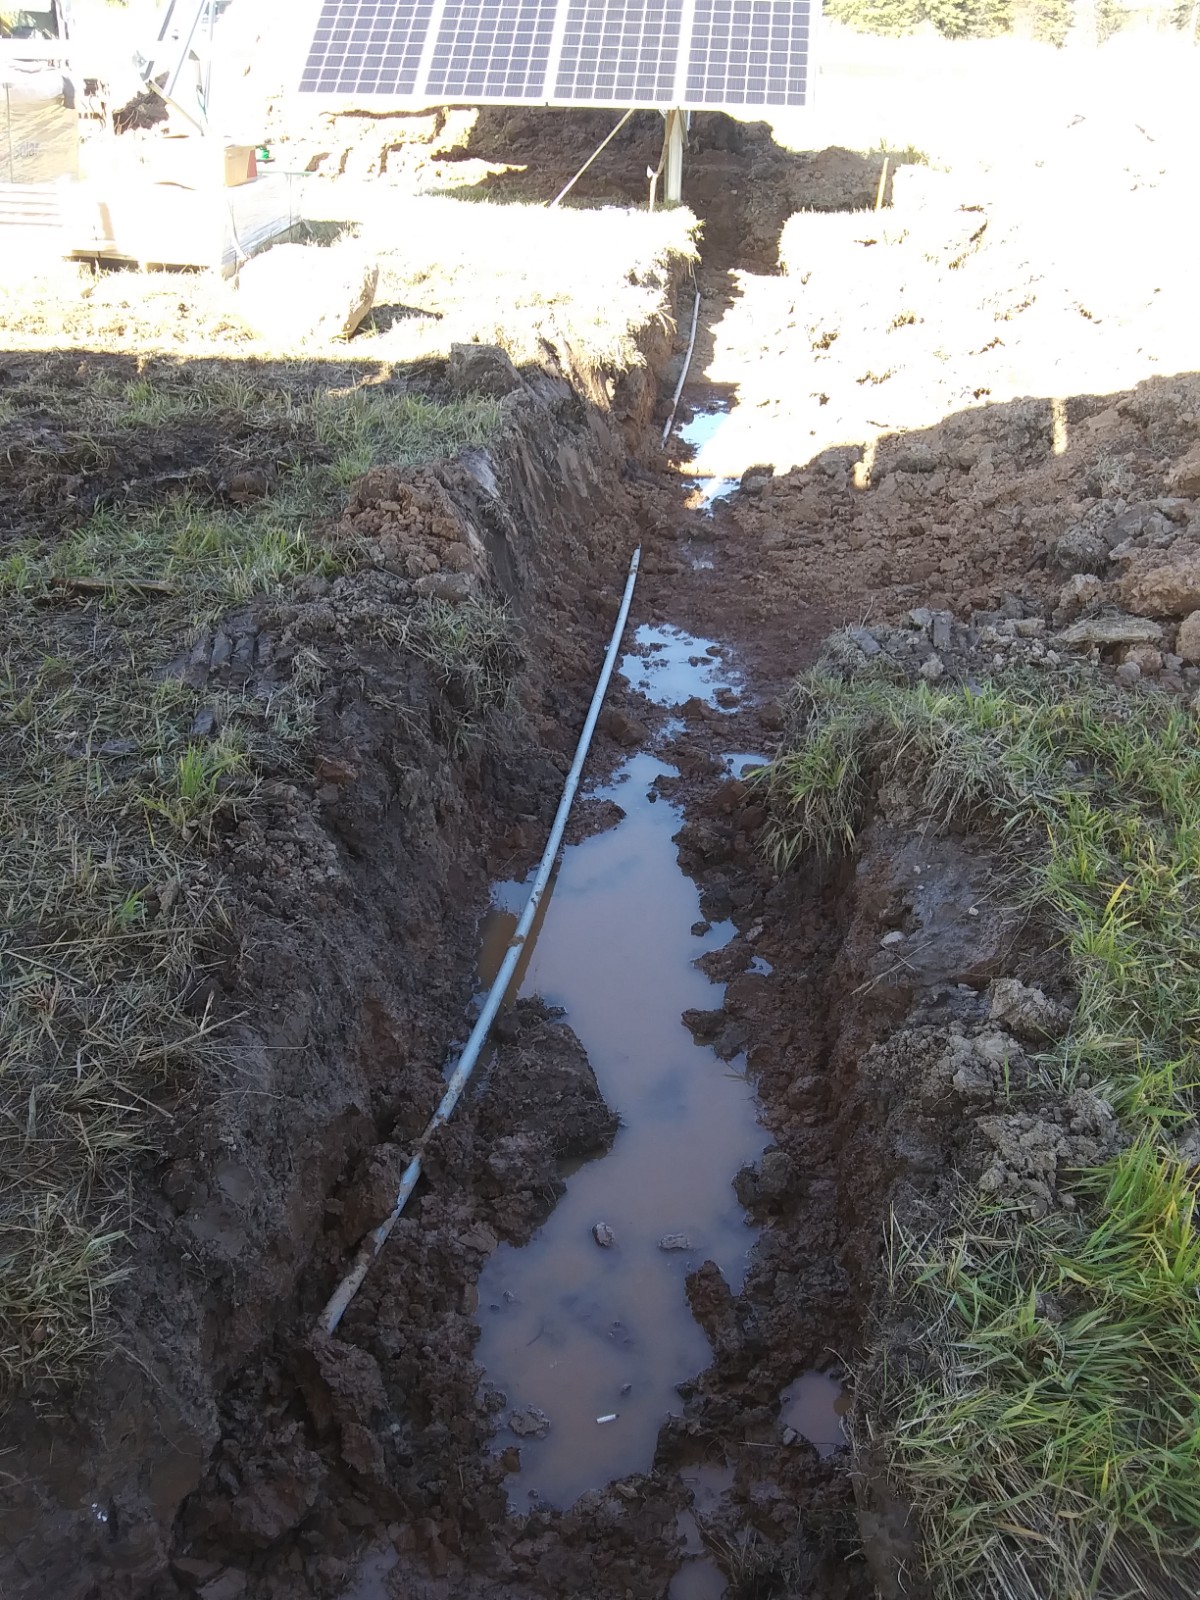 A ditch dug to install underground wiring to solar panels